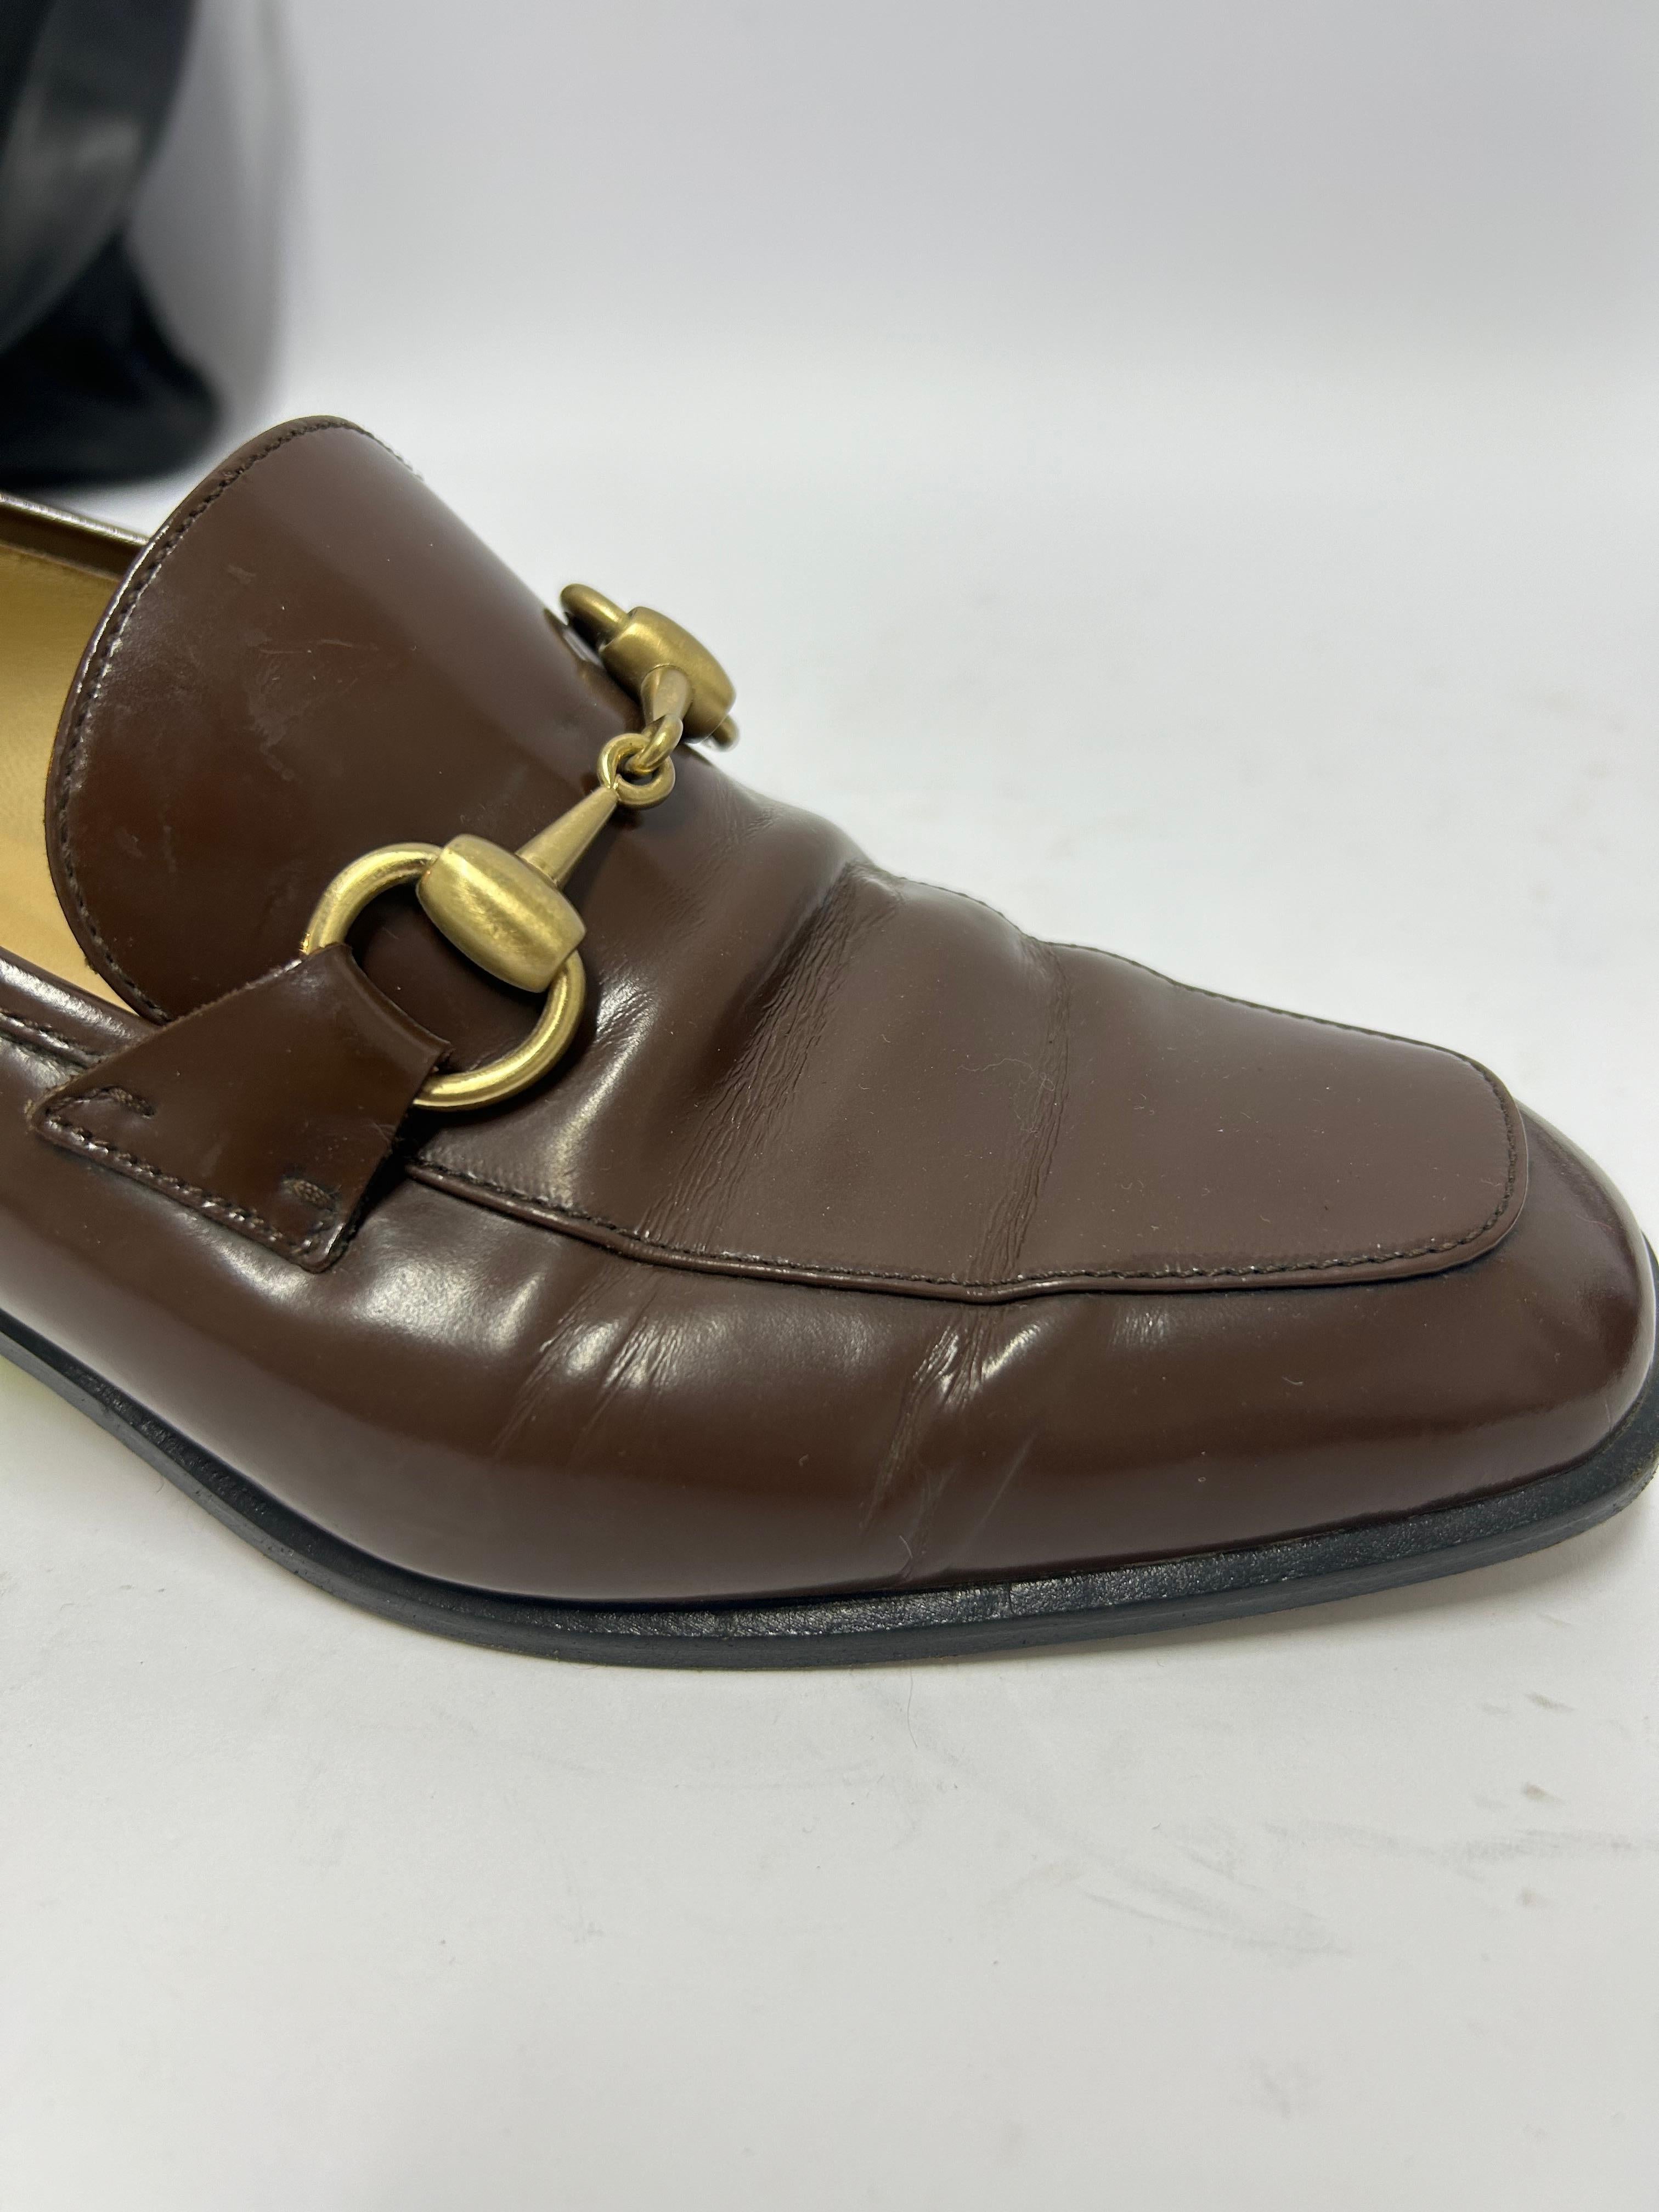 Gucci Horsebit Leather Loafers Size EU 36.5 For Sale 13